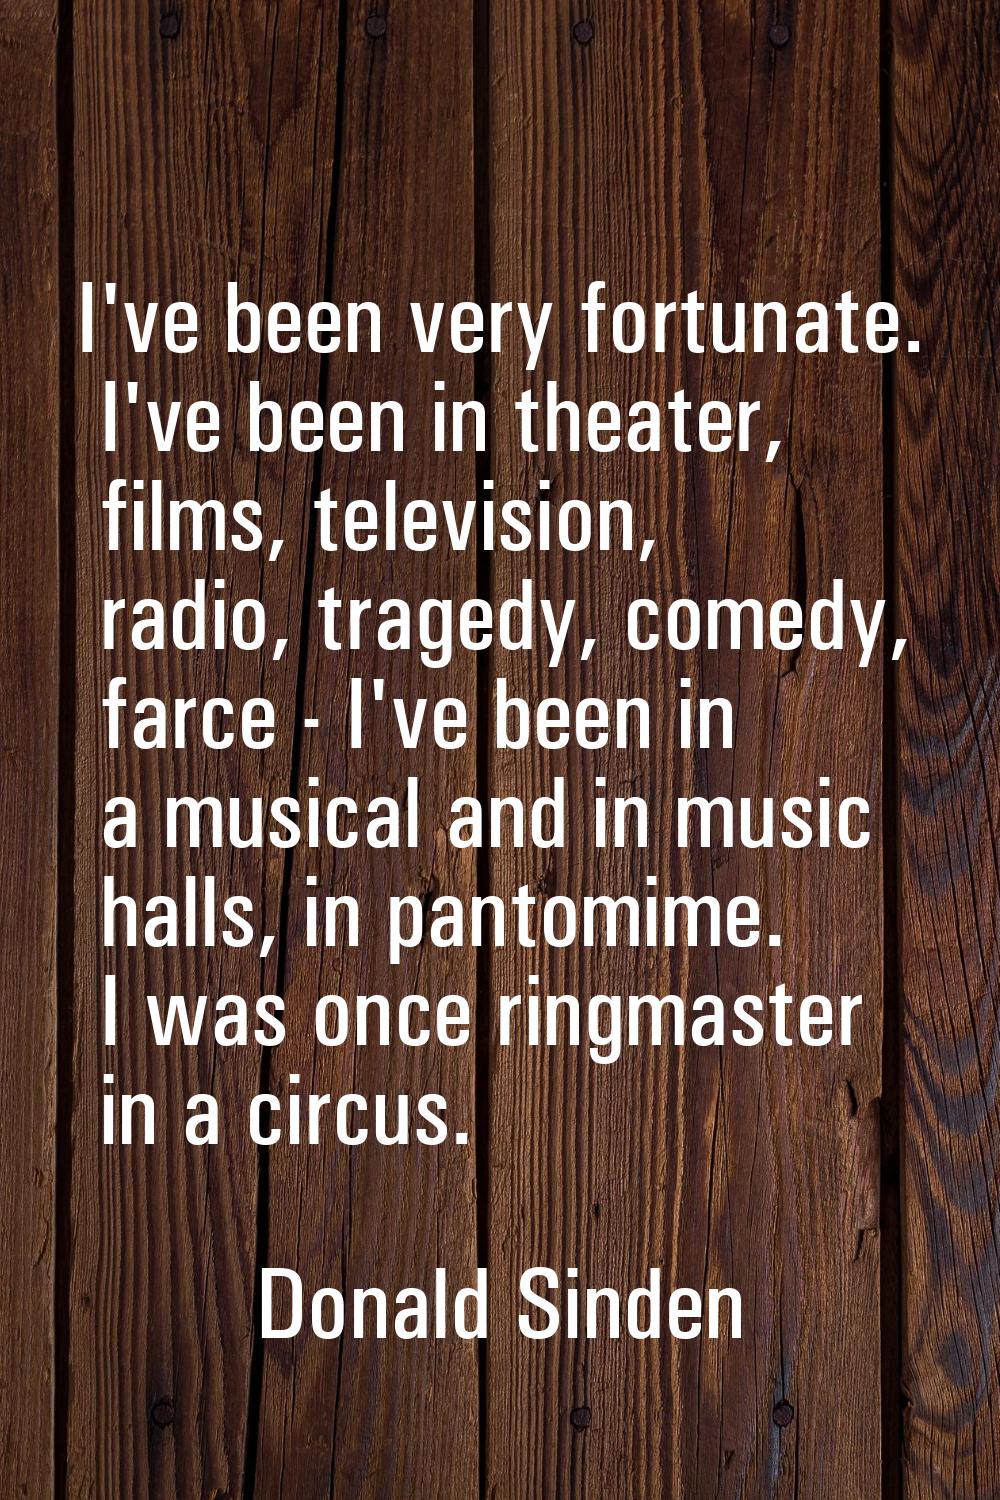 I've been very fortunate. I've been in theater, films, television, radio, tragedy, comedy, farce - 